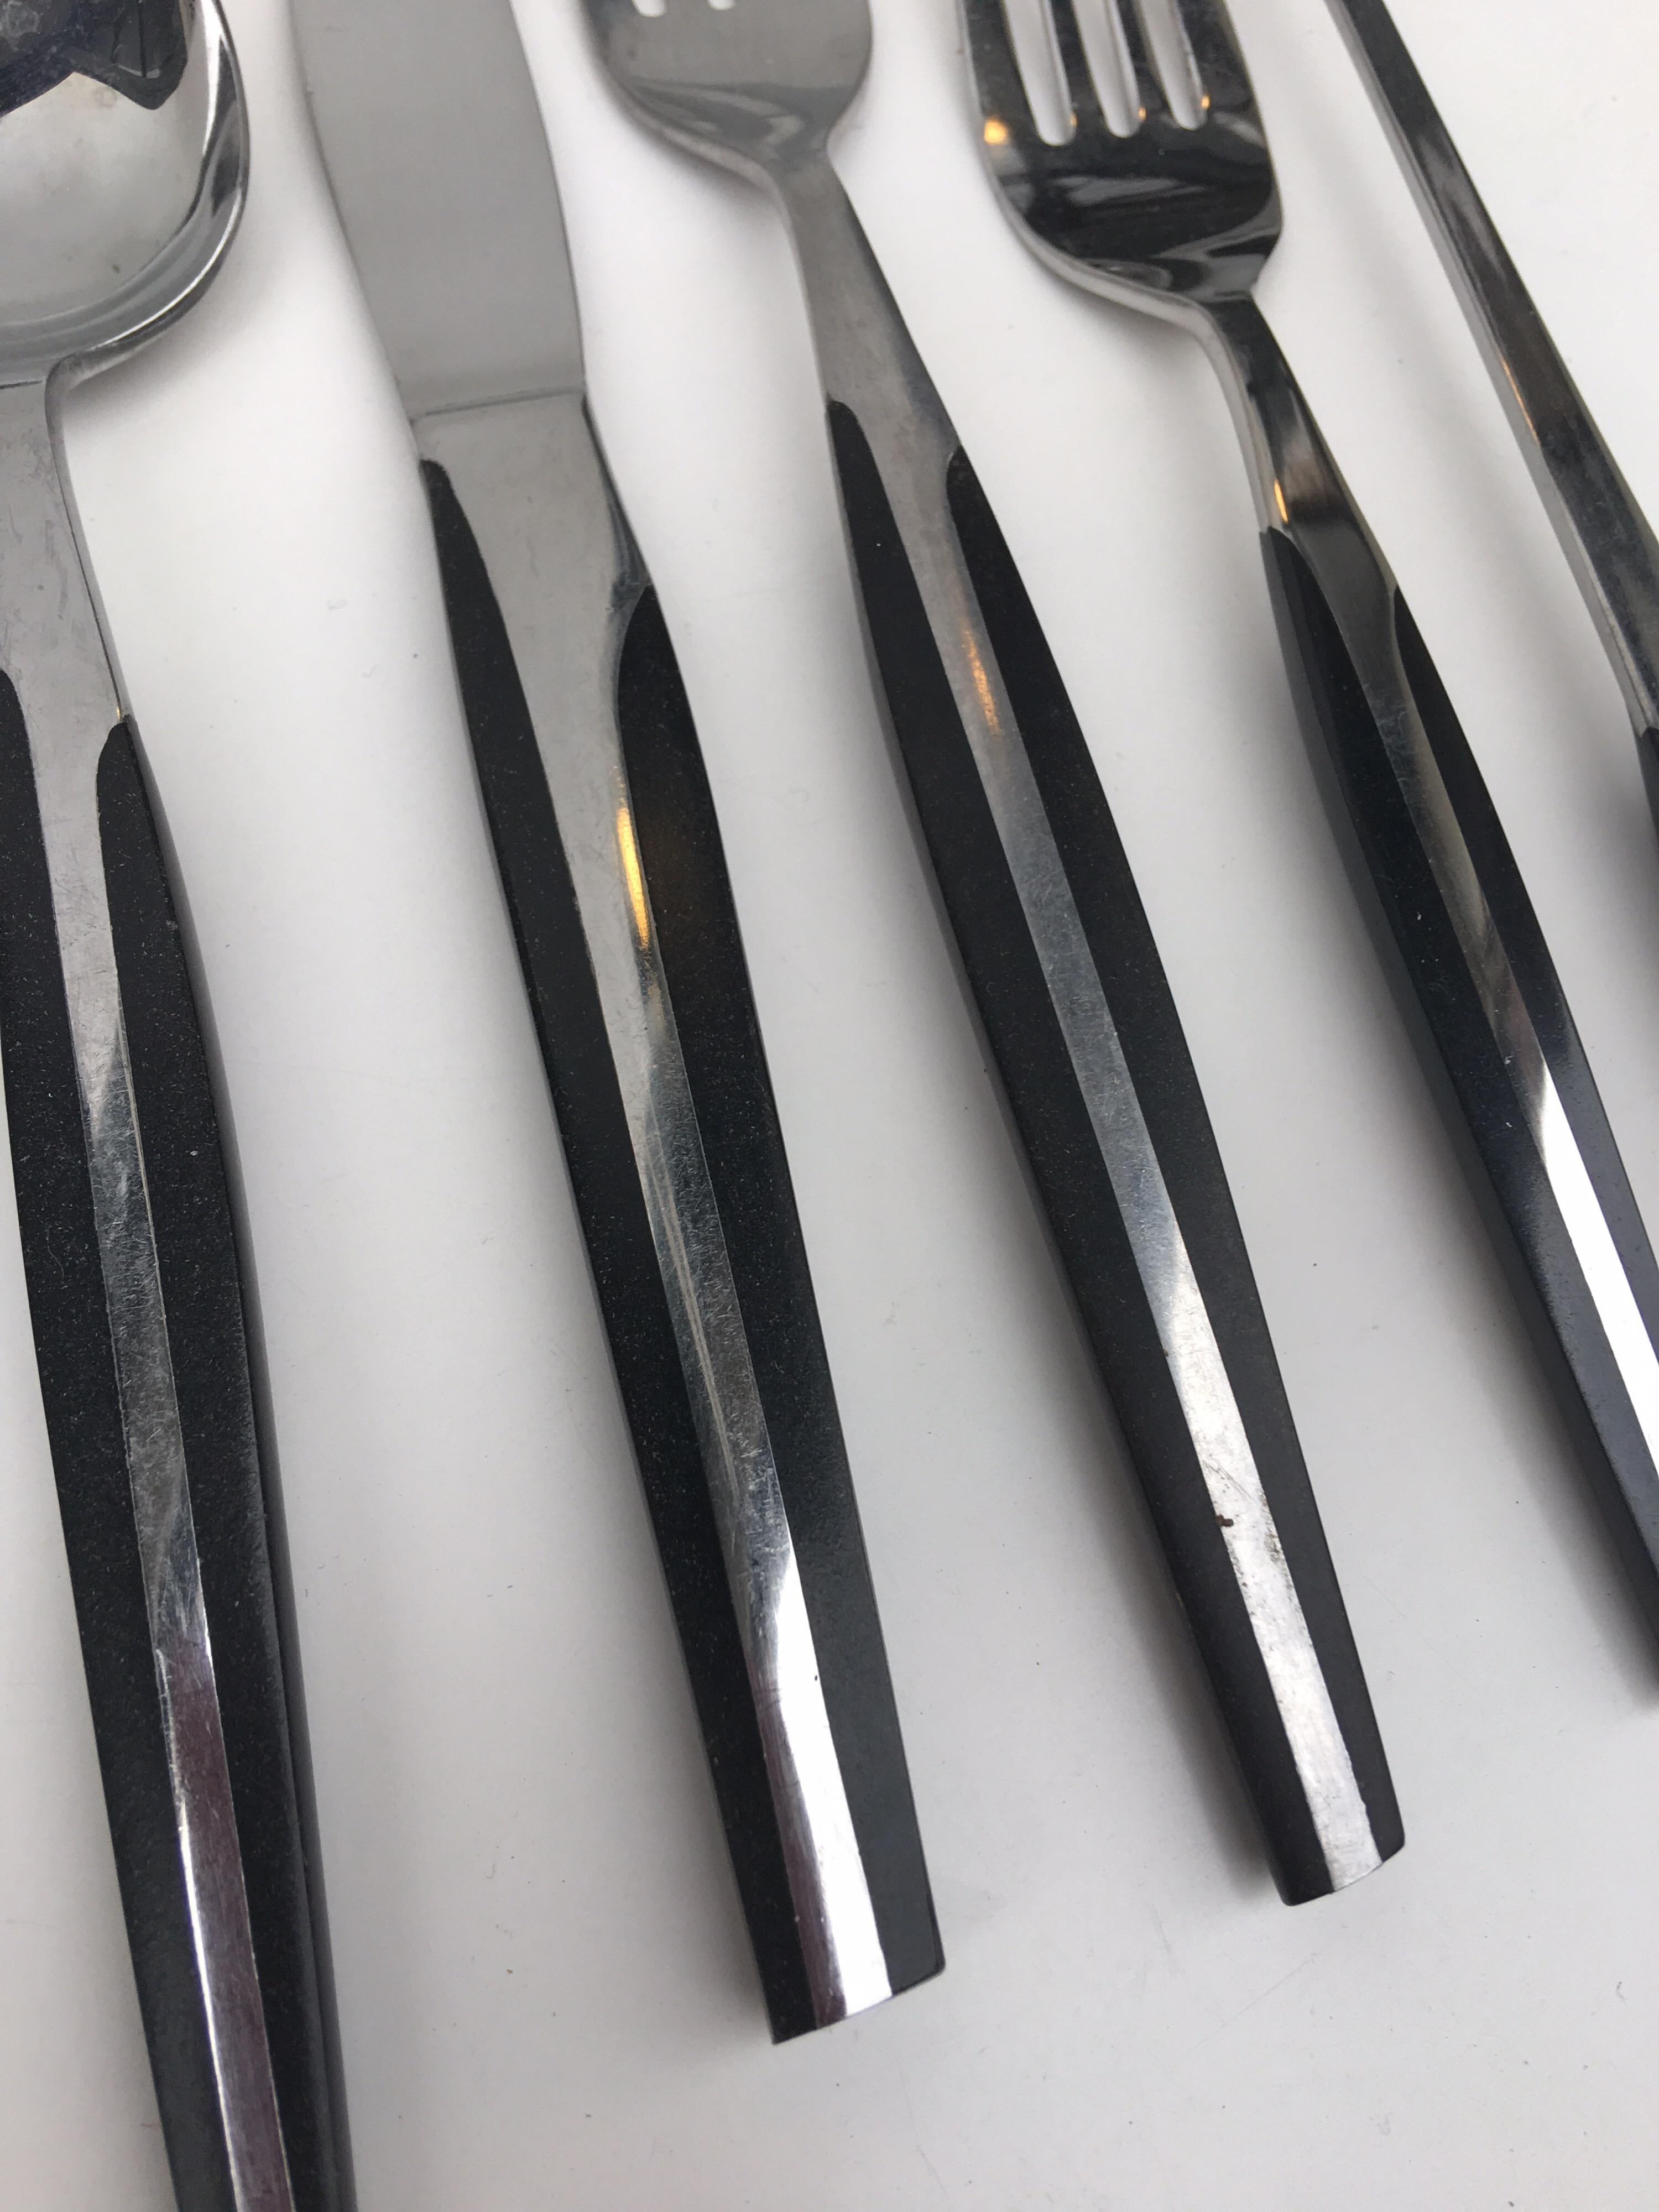 Eldan stainless steel flatware with ebonized handles made in Japan. Very extensive complete seven piece place settings for ten with nine serving pieces and a few extra. Total of 87 pieces.